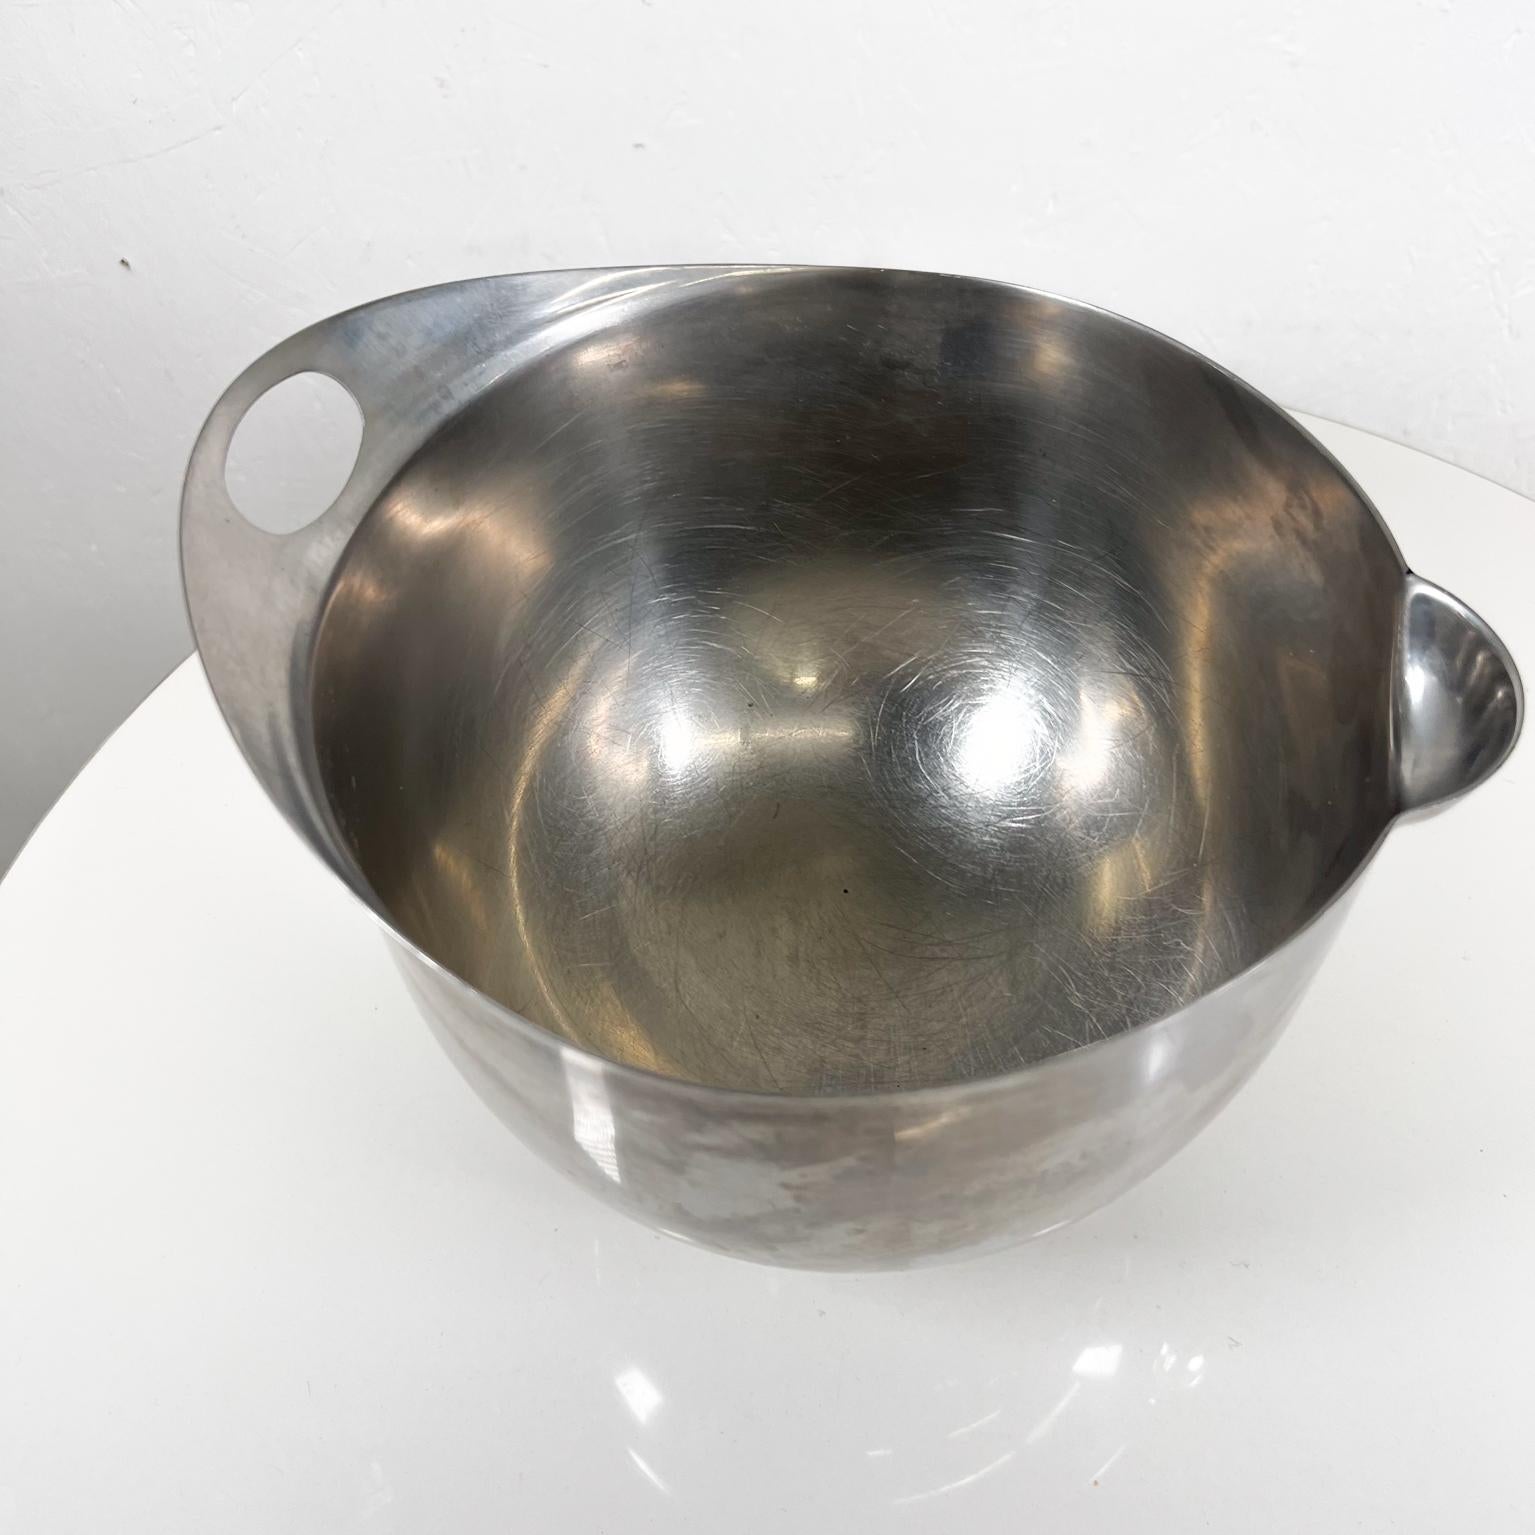 1985 Michael Graves Design Stainless Steel Footed Mixing Bowl For Sale 2